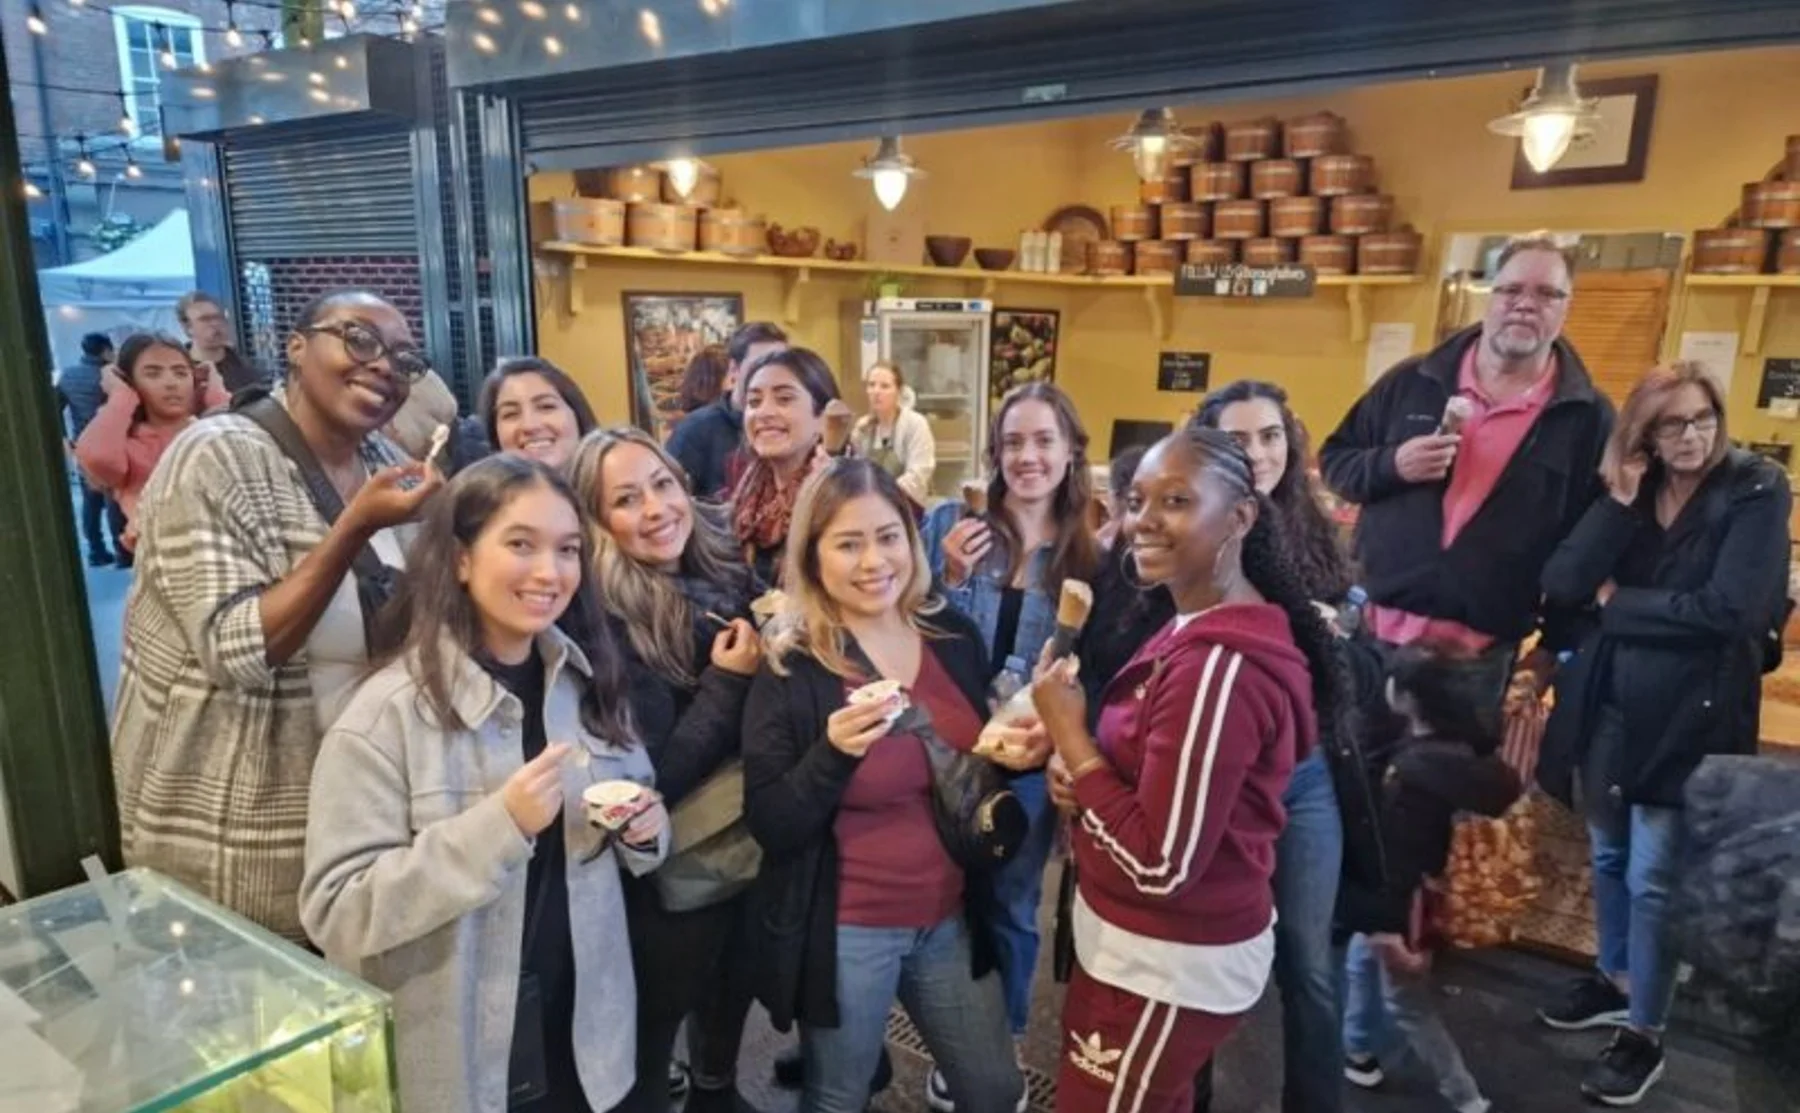 Borough Market Food Tour with local London guide - 1512199